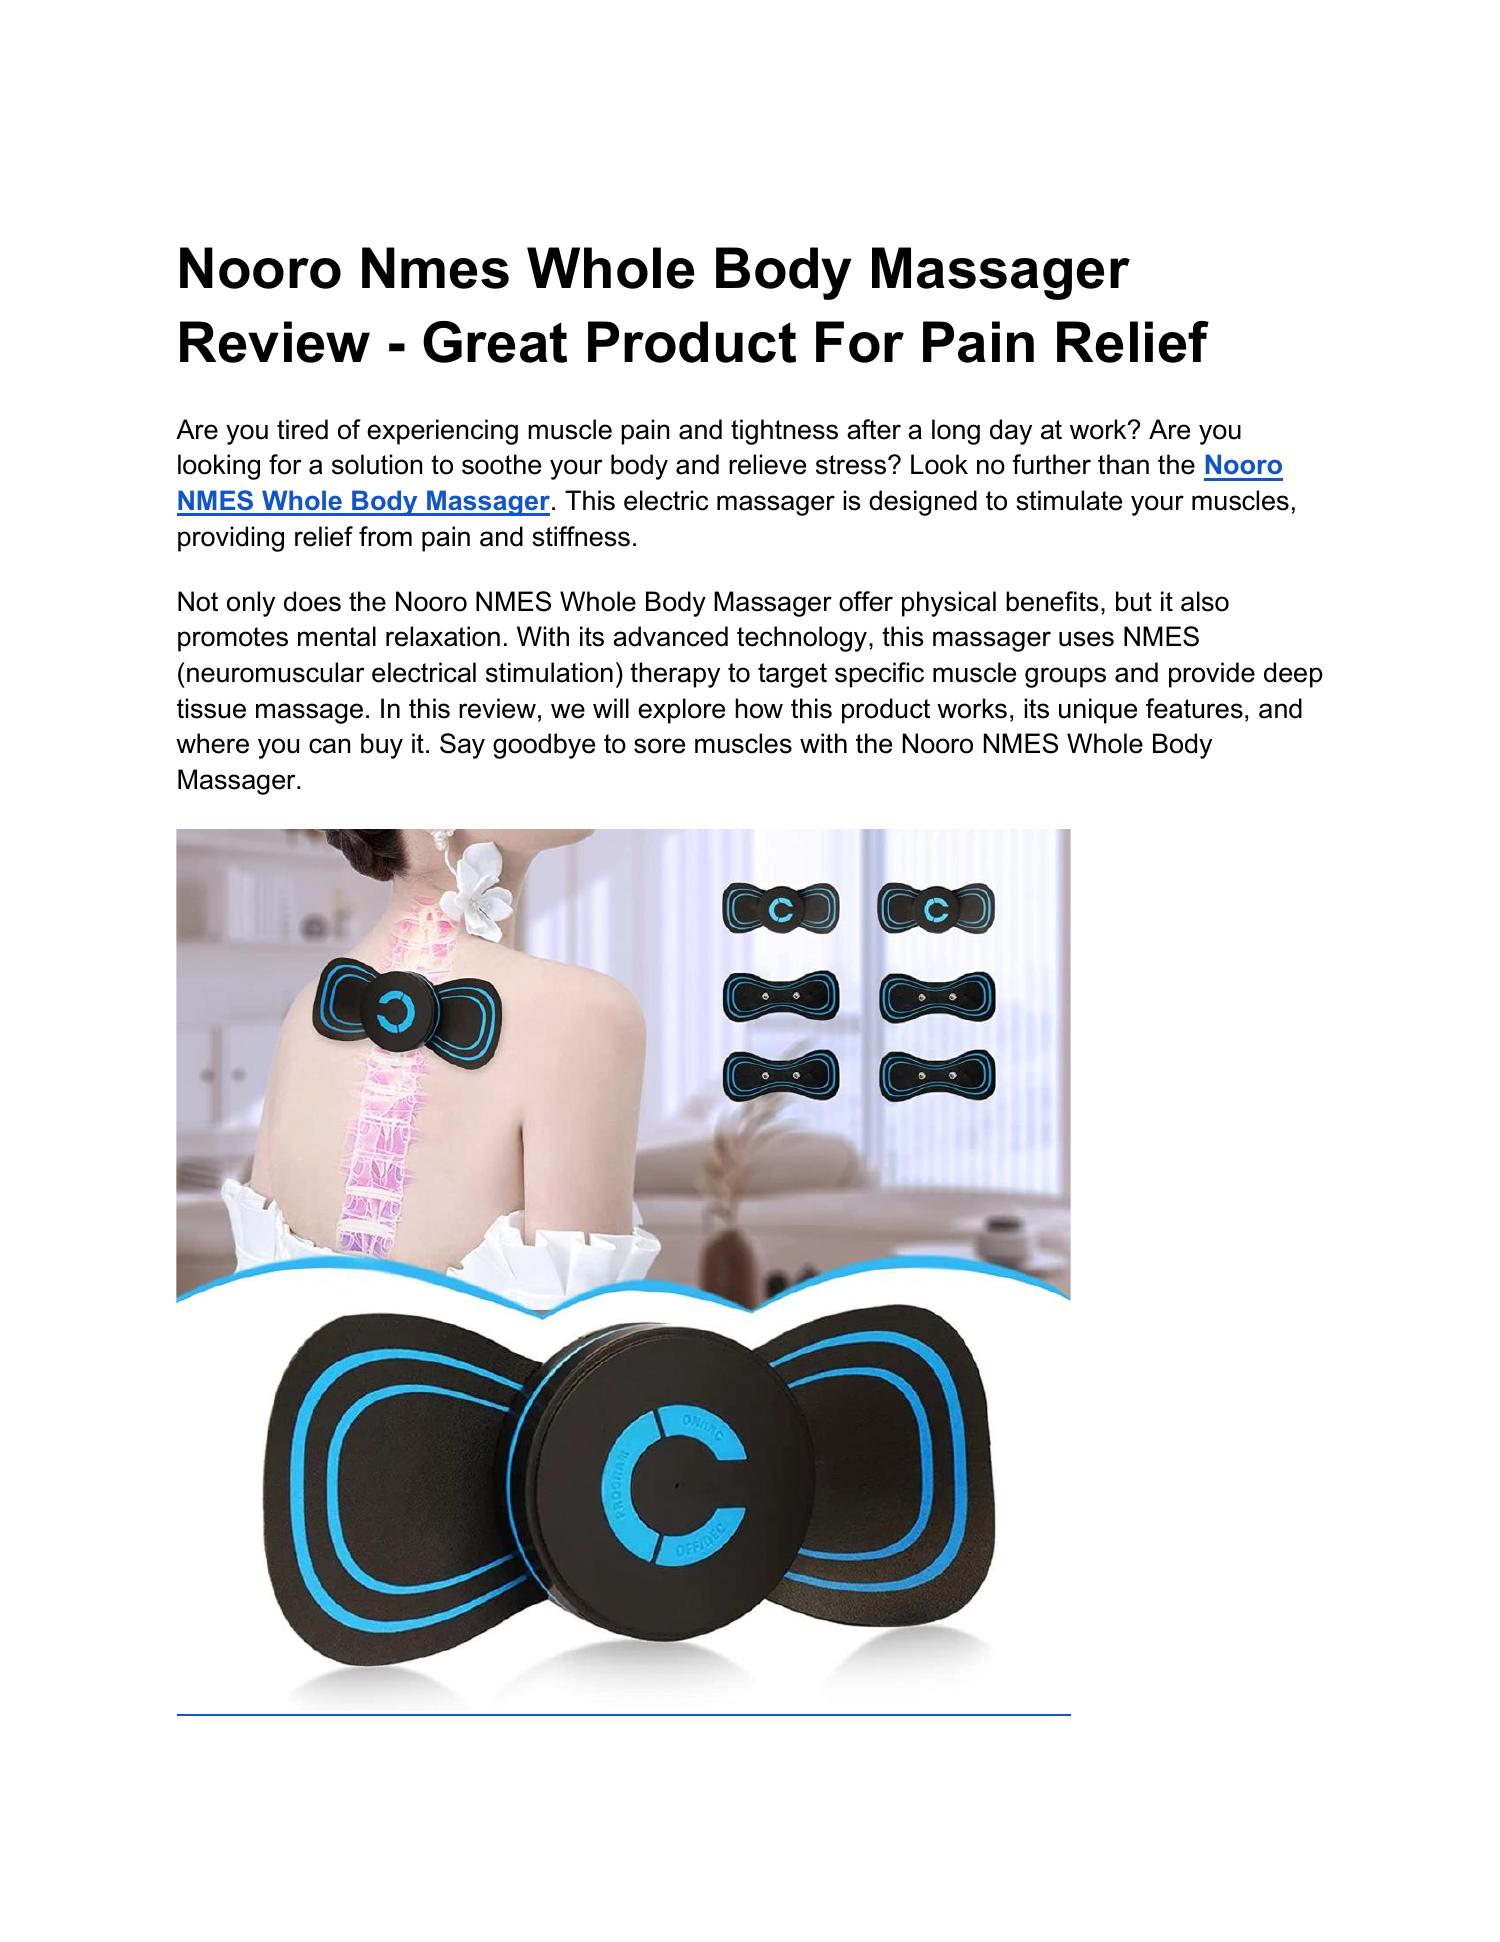 https://www.docdroid.com/file/view/Ej8mtIG/nooro-nmes-whole-body-massager-review-great-product-for-pain-relief-docx.jpg